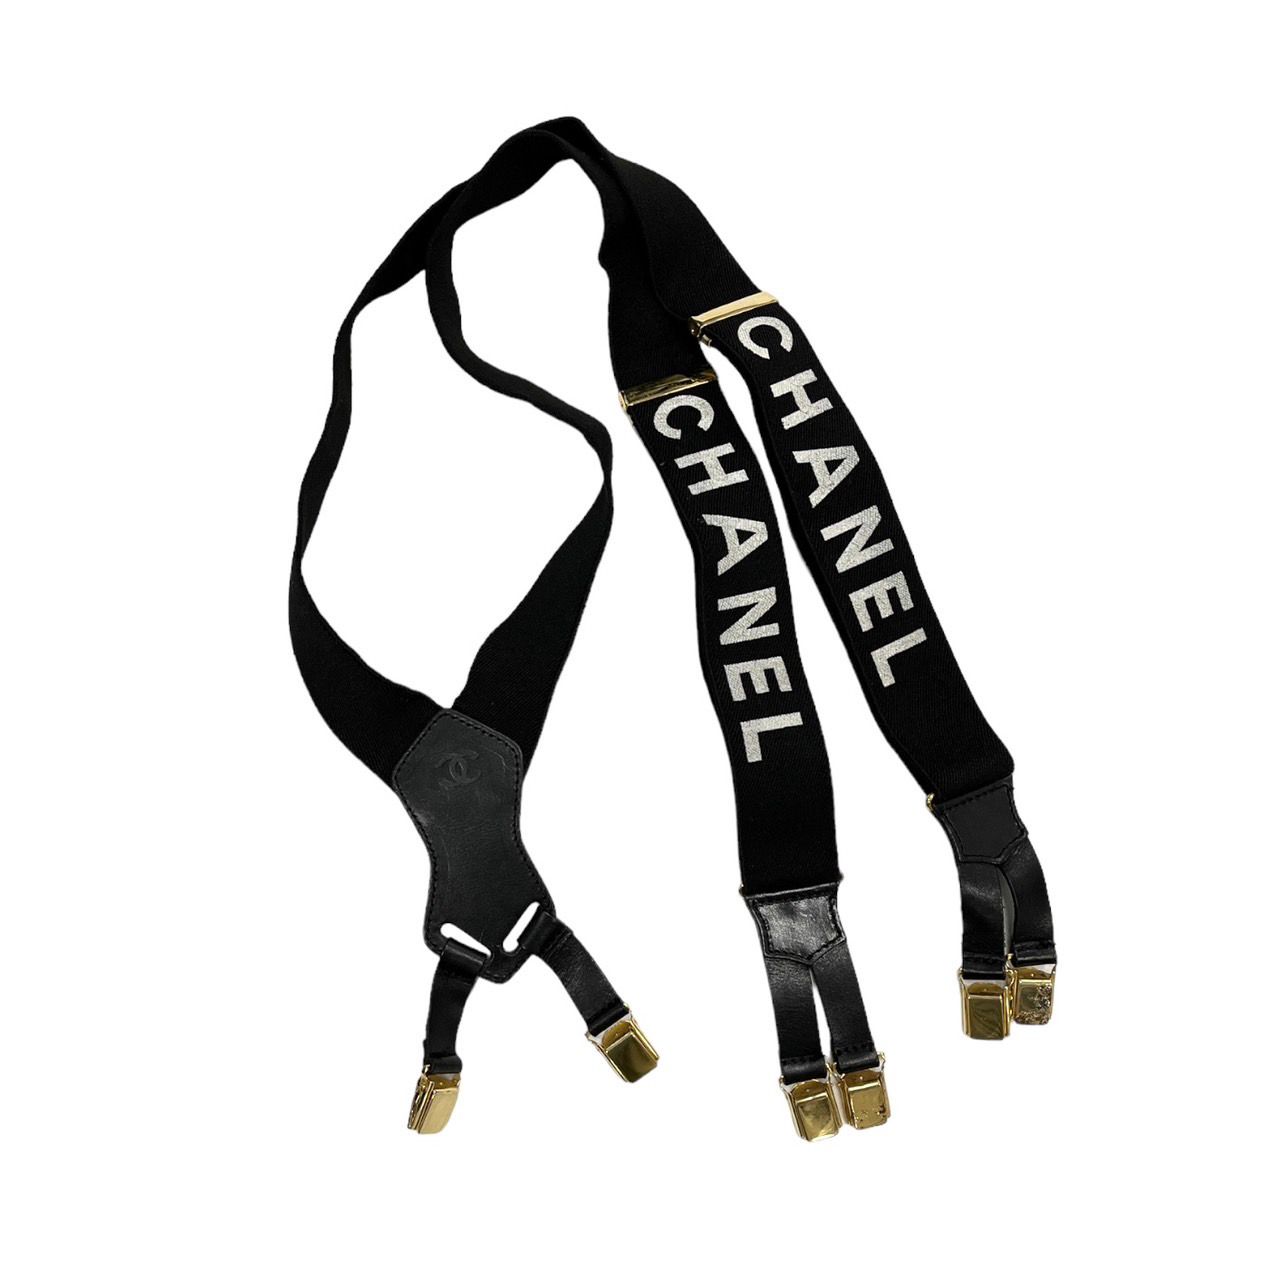 Sold at Auction: Chanel Suspenders Black White